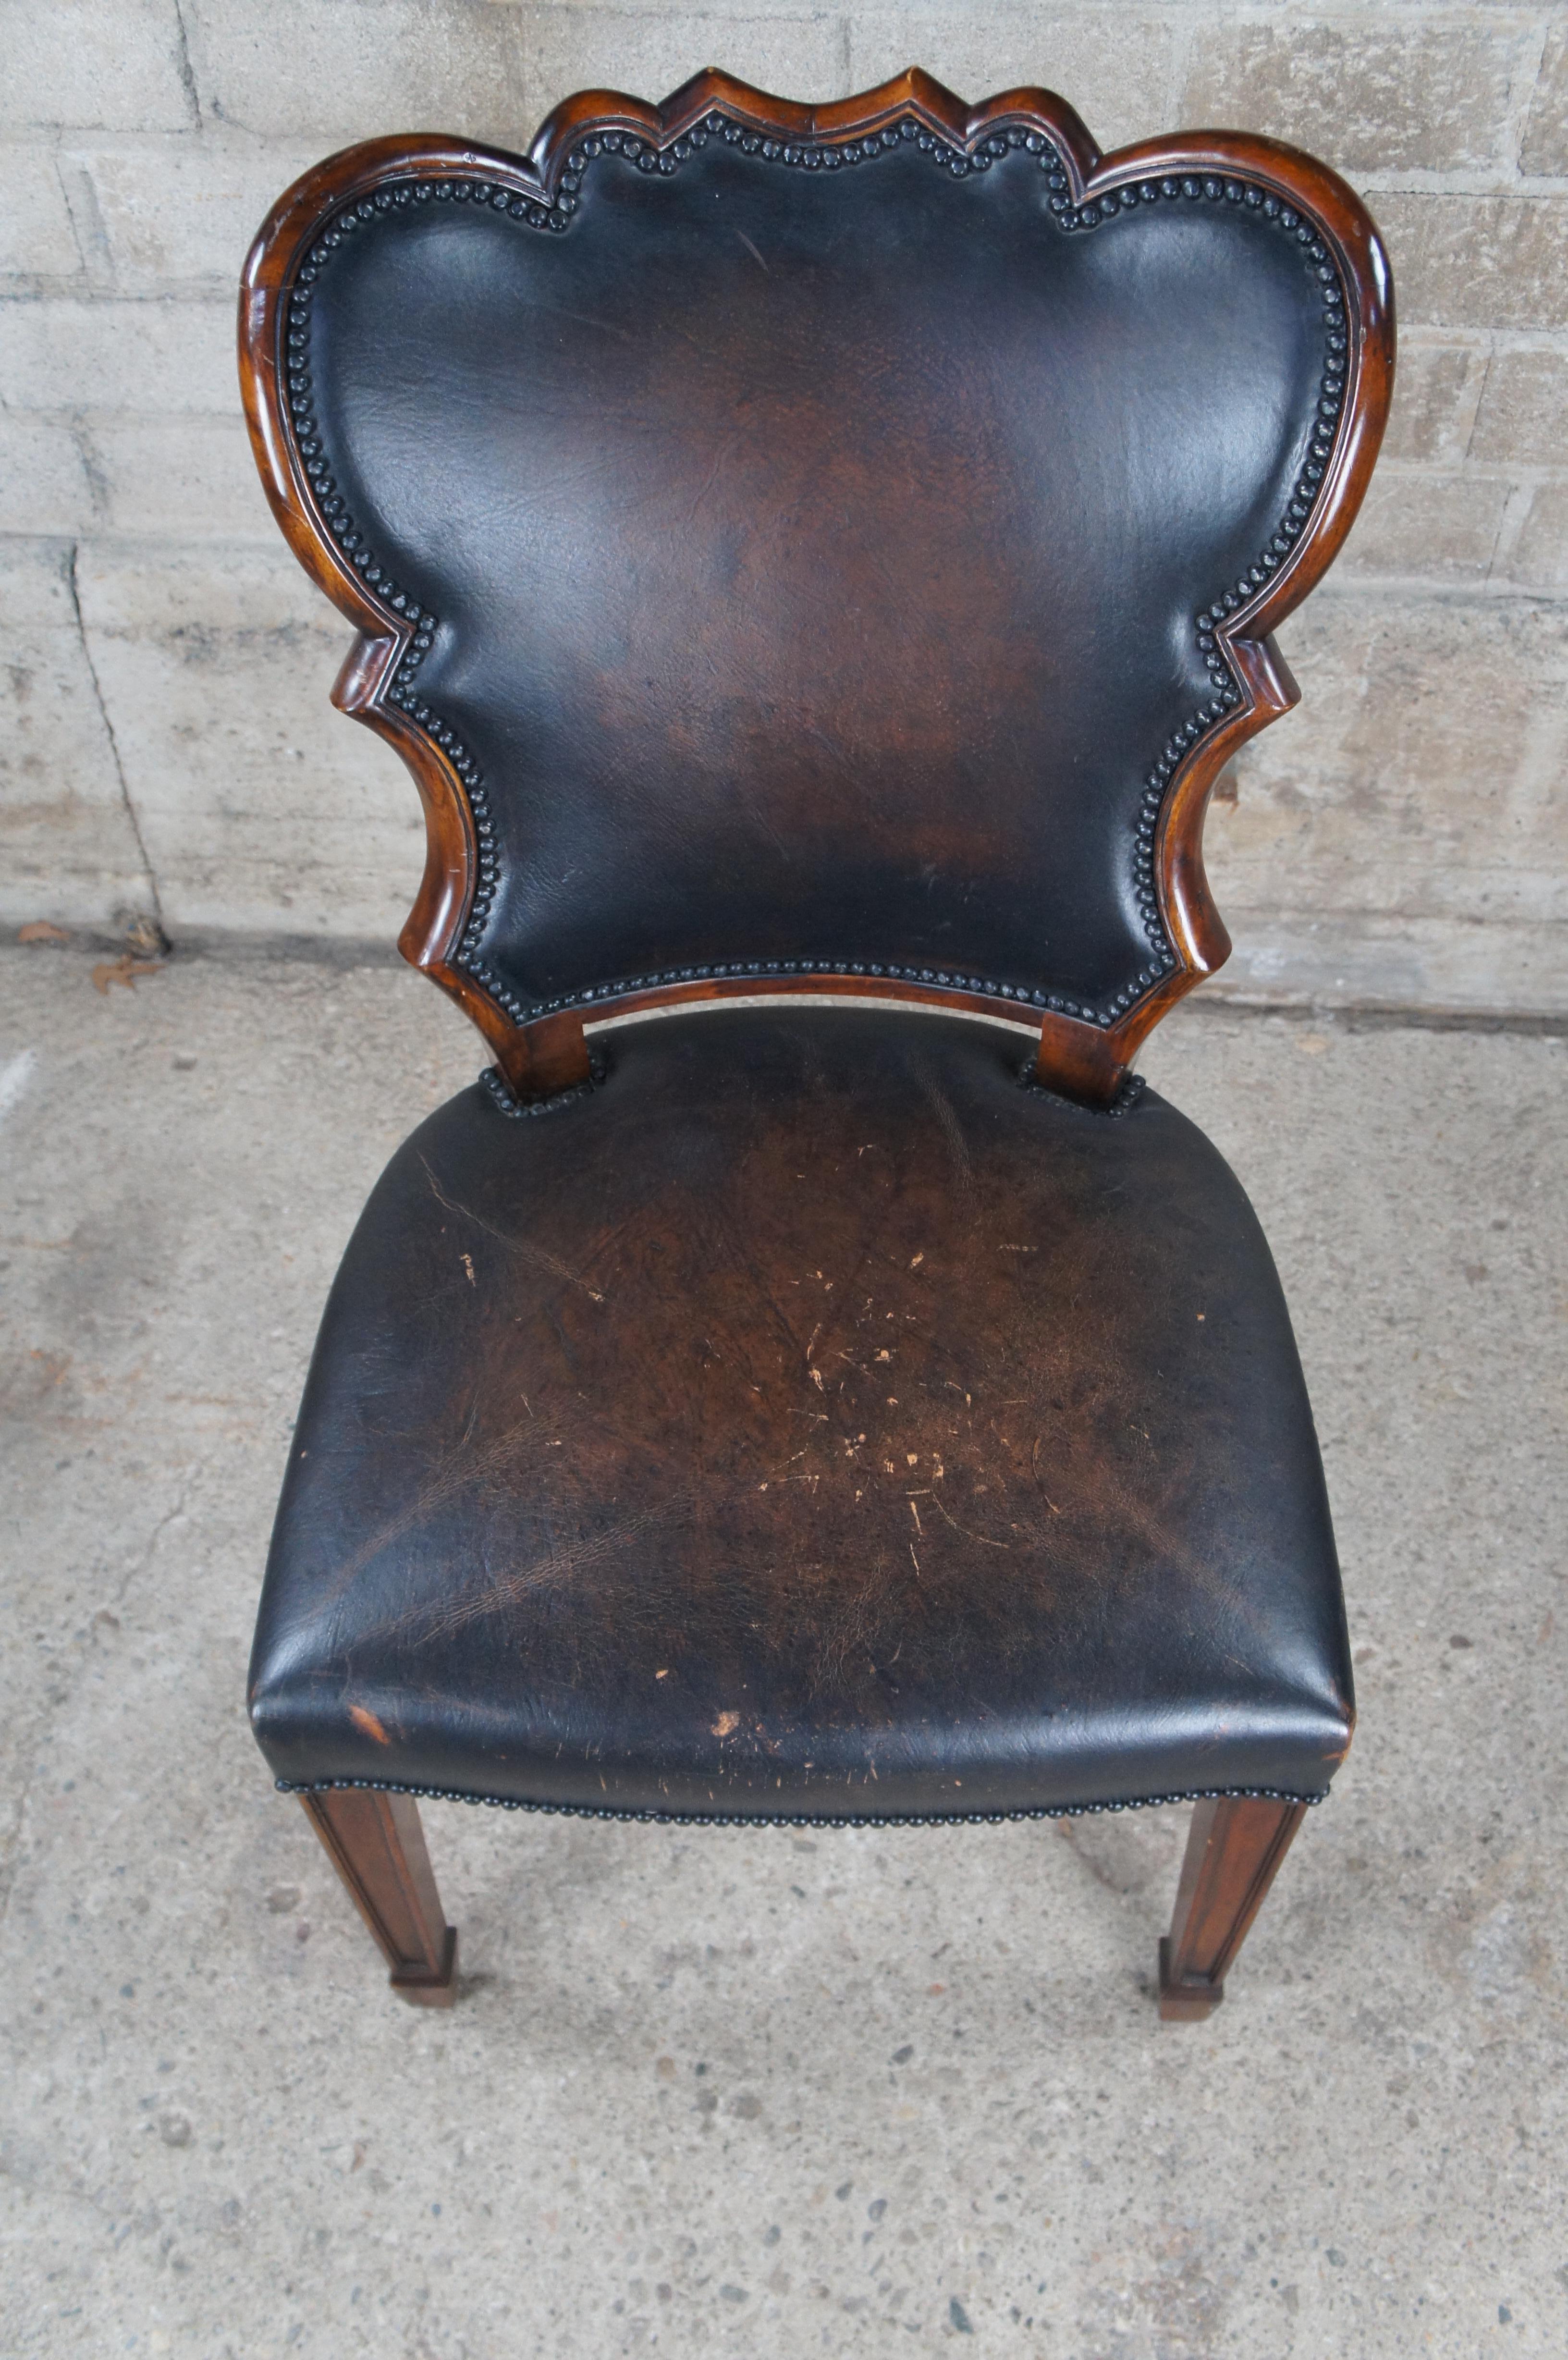 Vintage Theodore Alexander Sheraton Style Mahogany Brown Leather Side Desk Chair In Good Condition For Sale In Dayton, OH